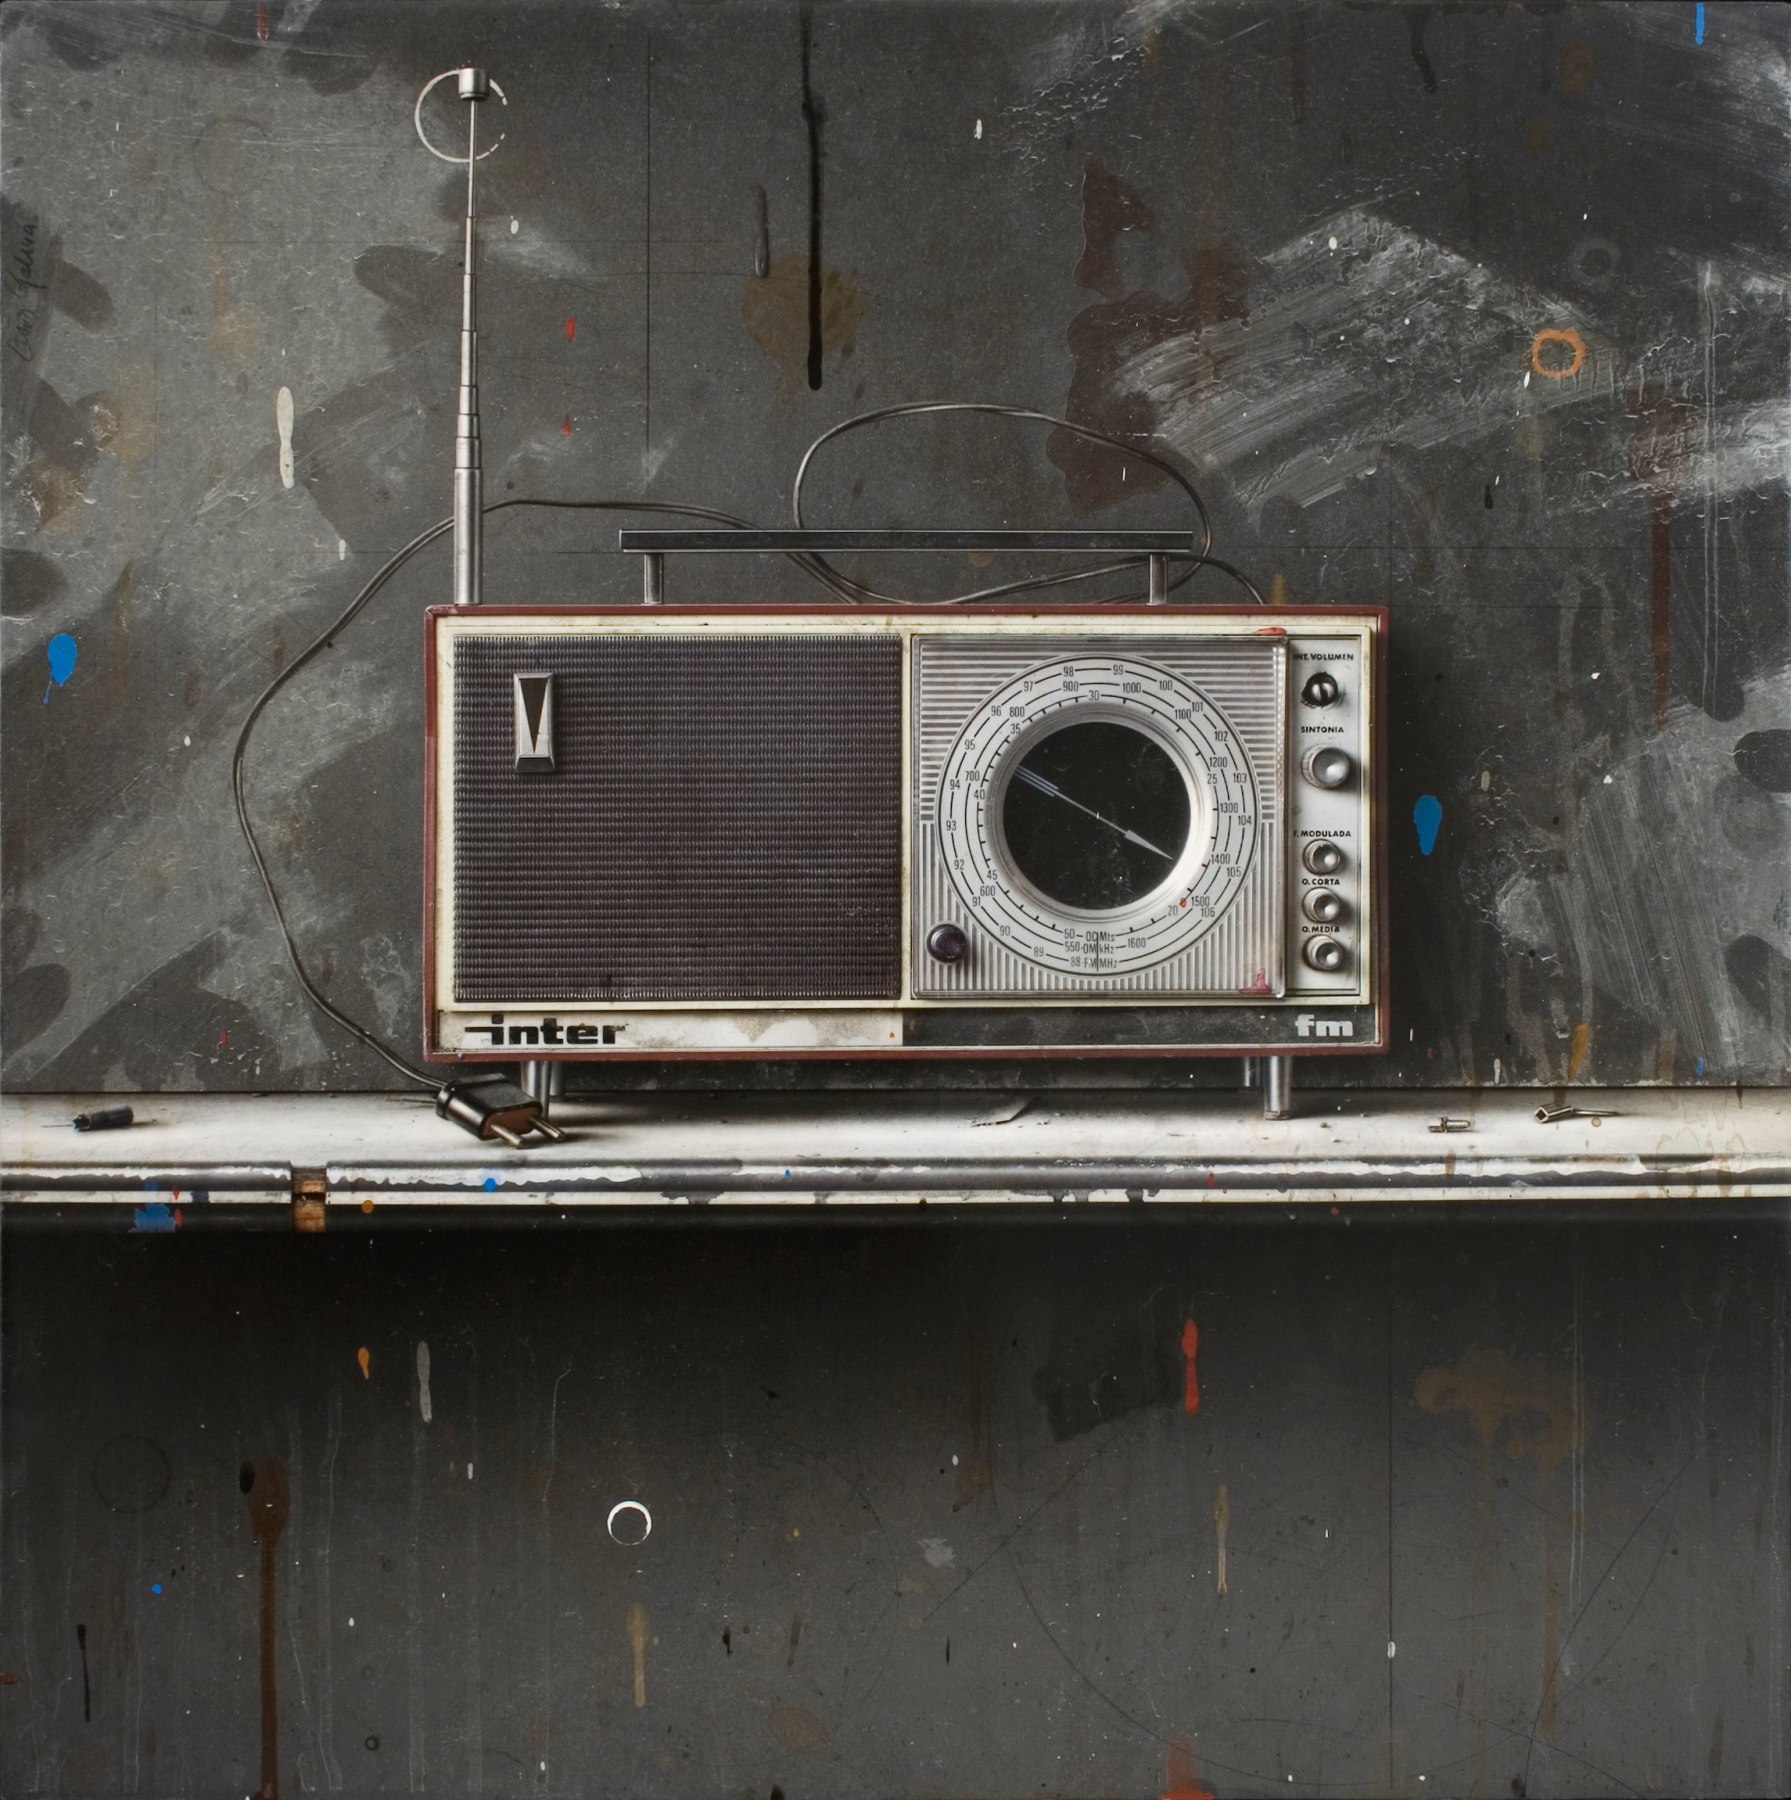 cesar galicia, Bodeg&oacute;n con Radio Inter (Still Life with Radio Inter), 2014, mixed media on plaster and wood, 22 5/8 x 22 3/4 inches